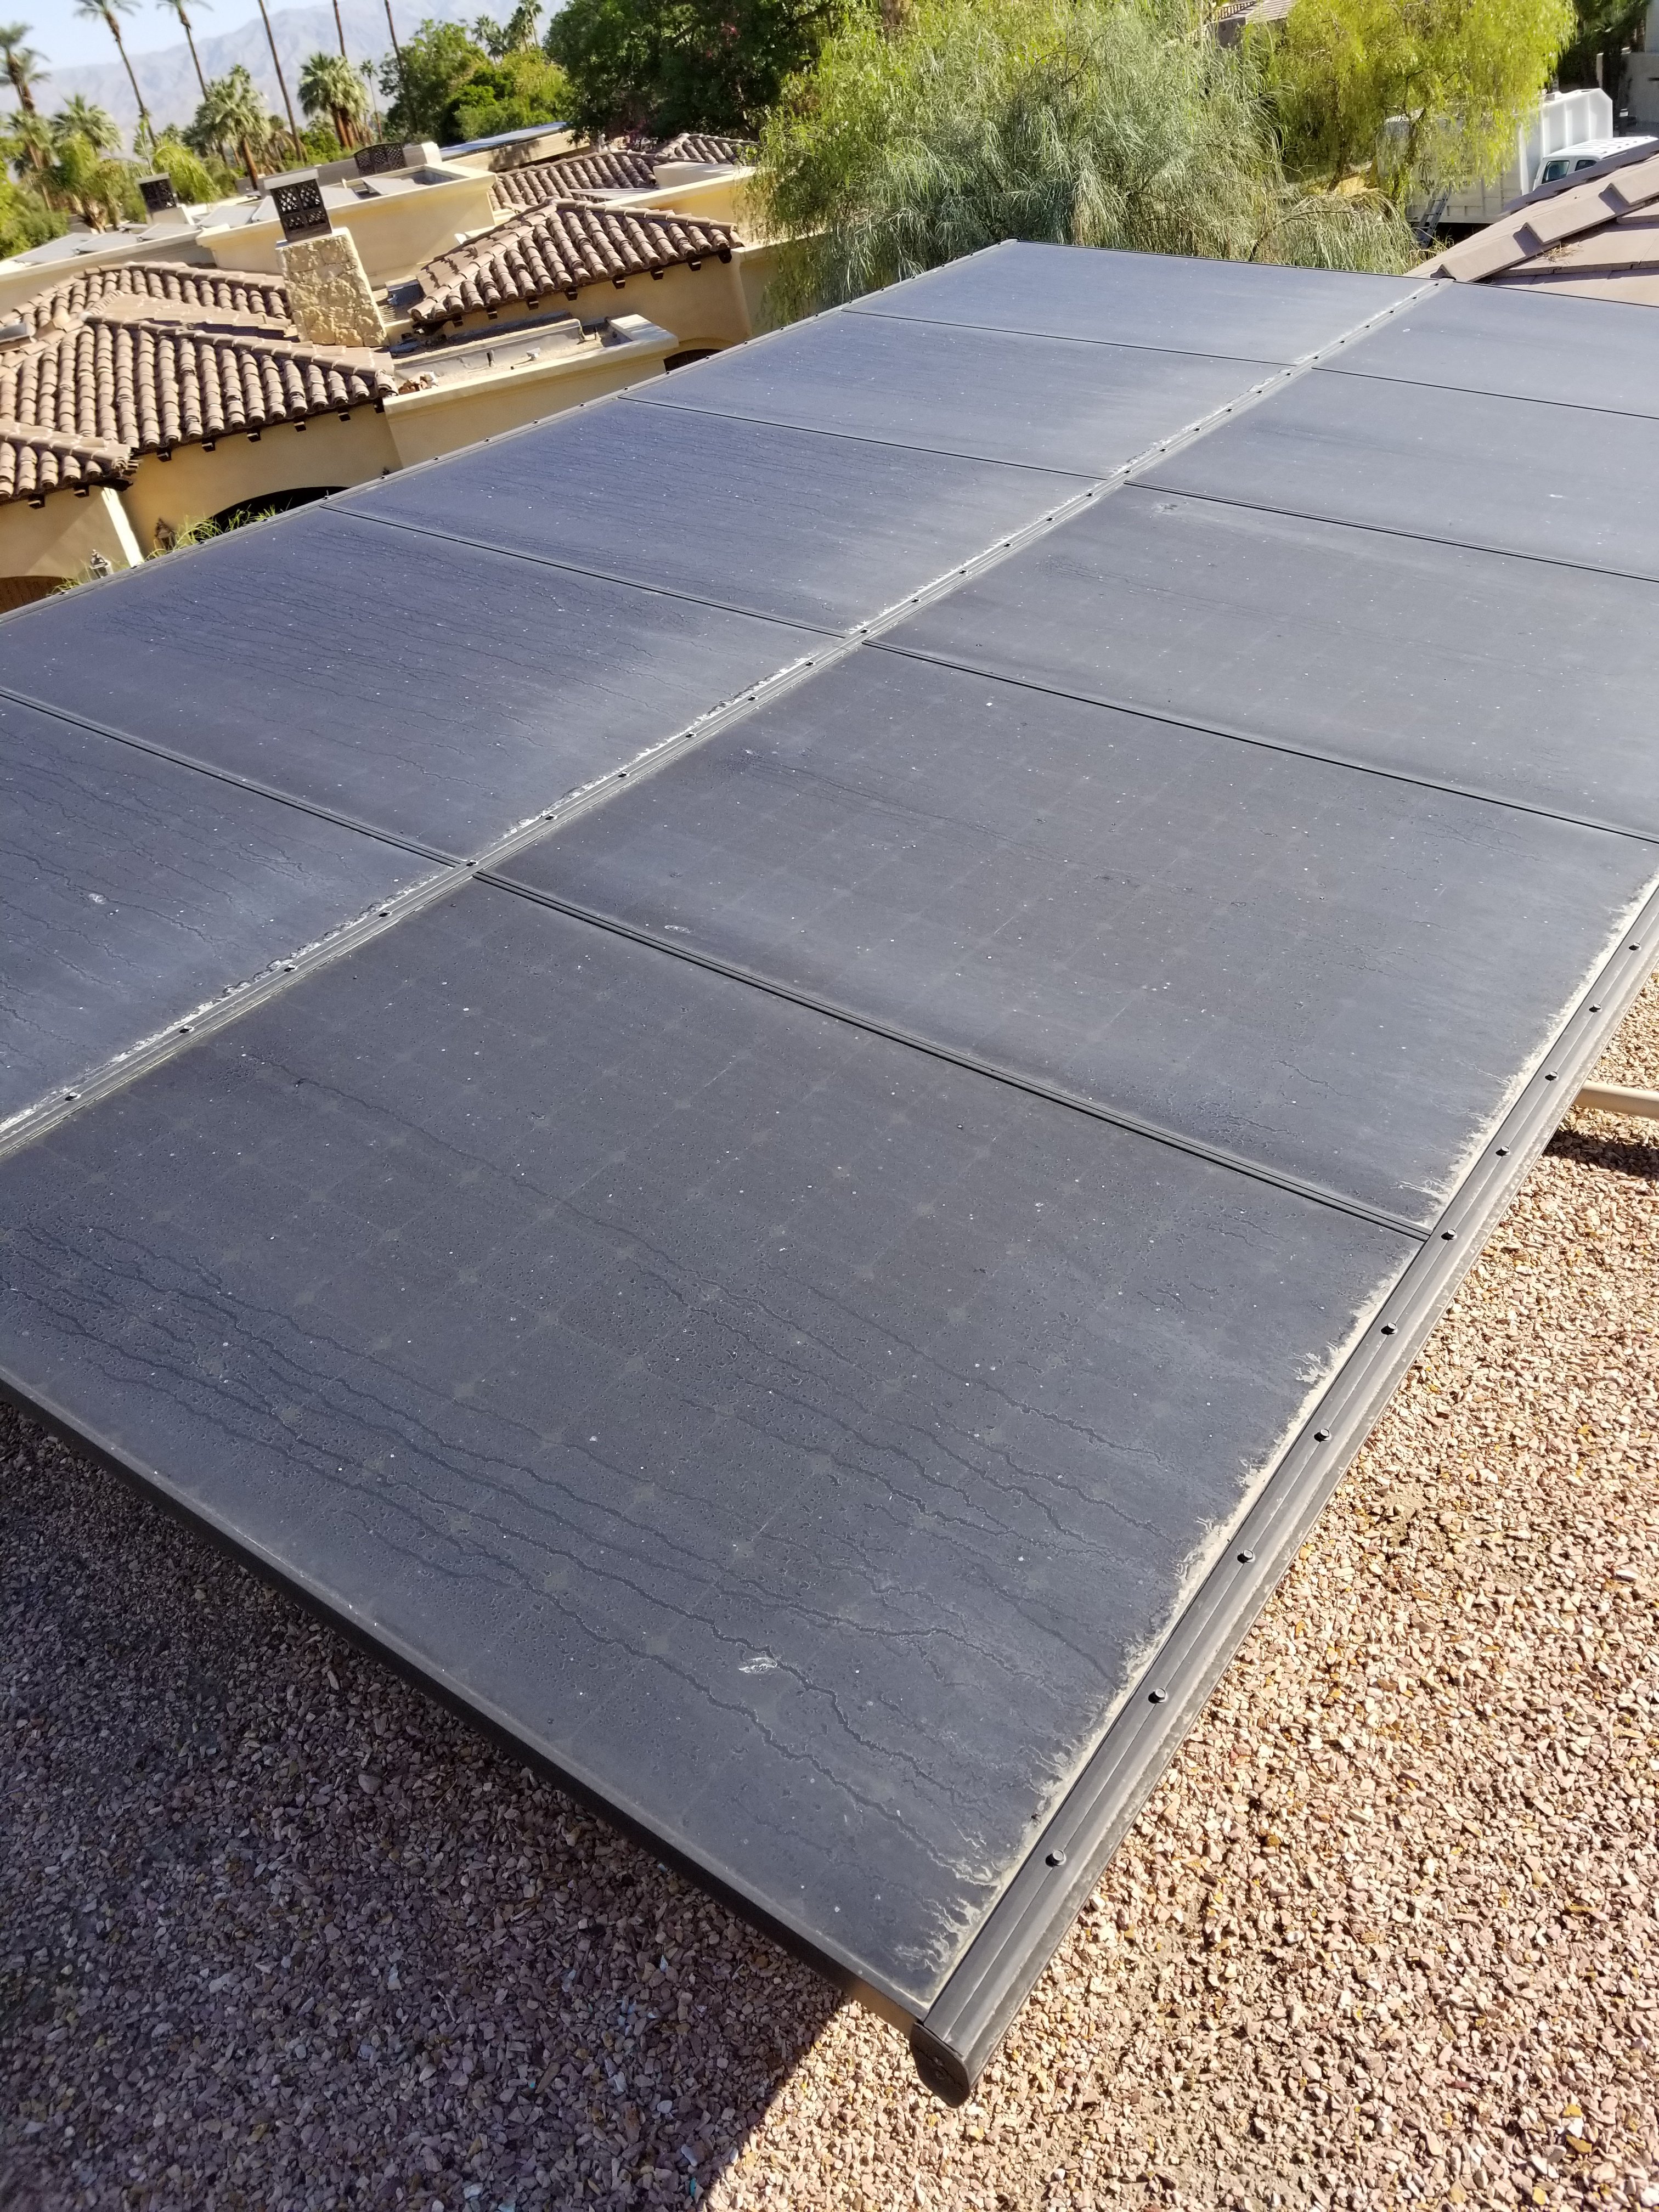 Dirty solar panels before a cleaning on home in Palm Springs, California 